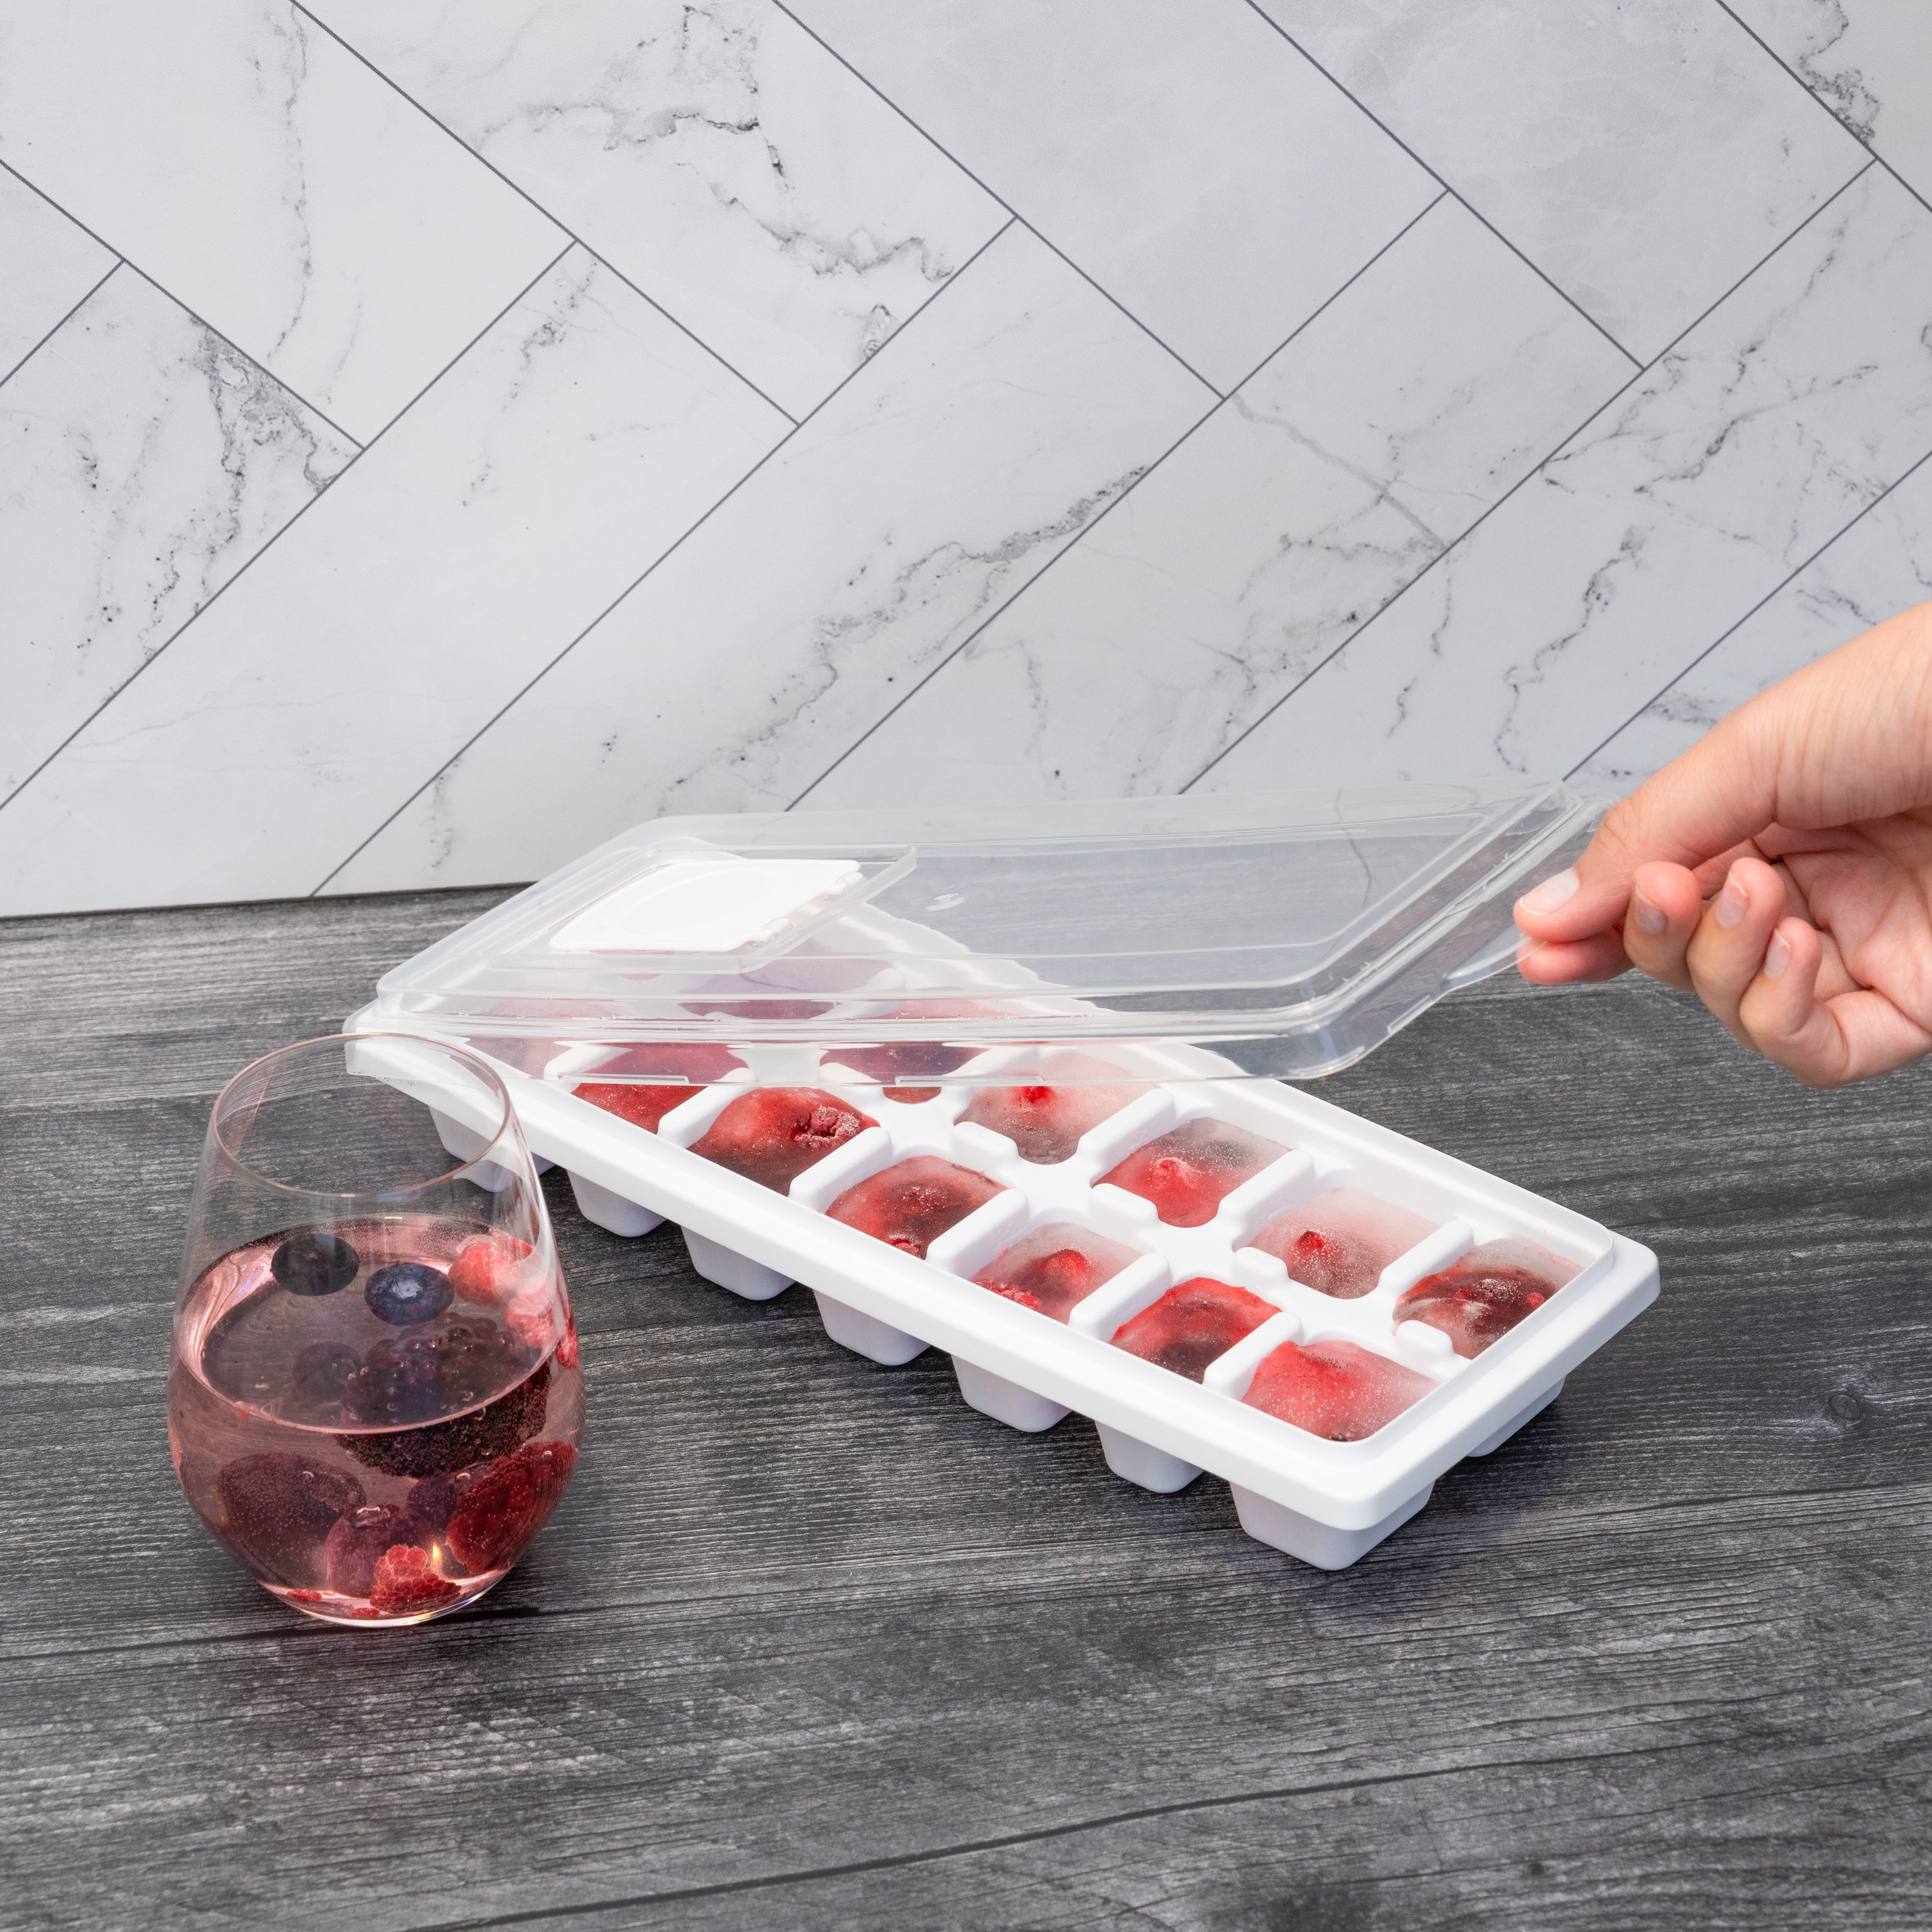 1pc 14 Grid Ice Cube Mold, Simple Ice Cube Tray For Kitchen, Summer